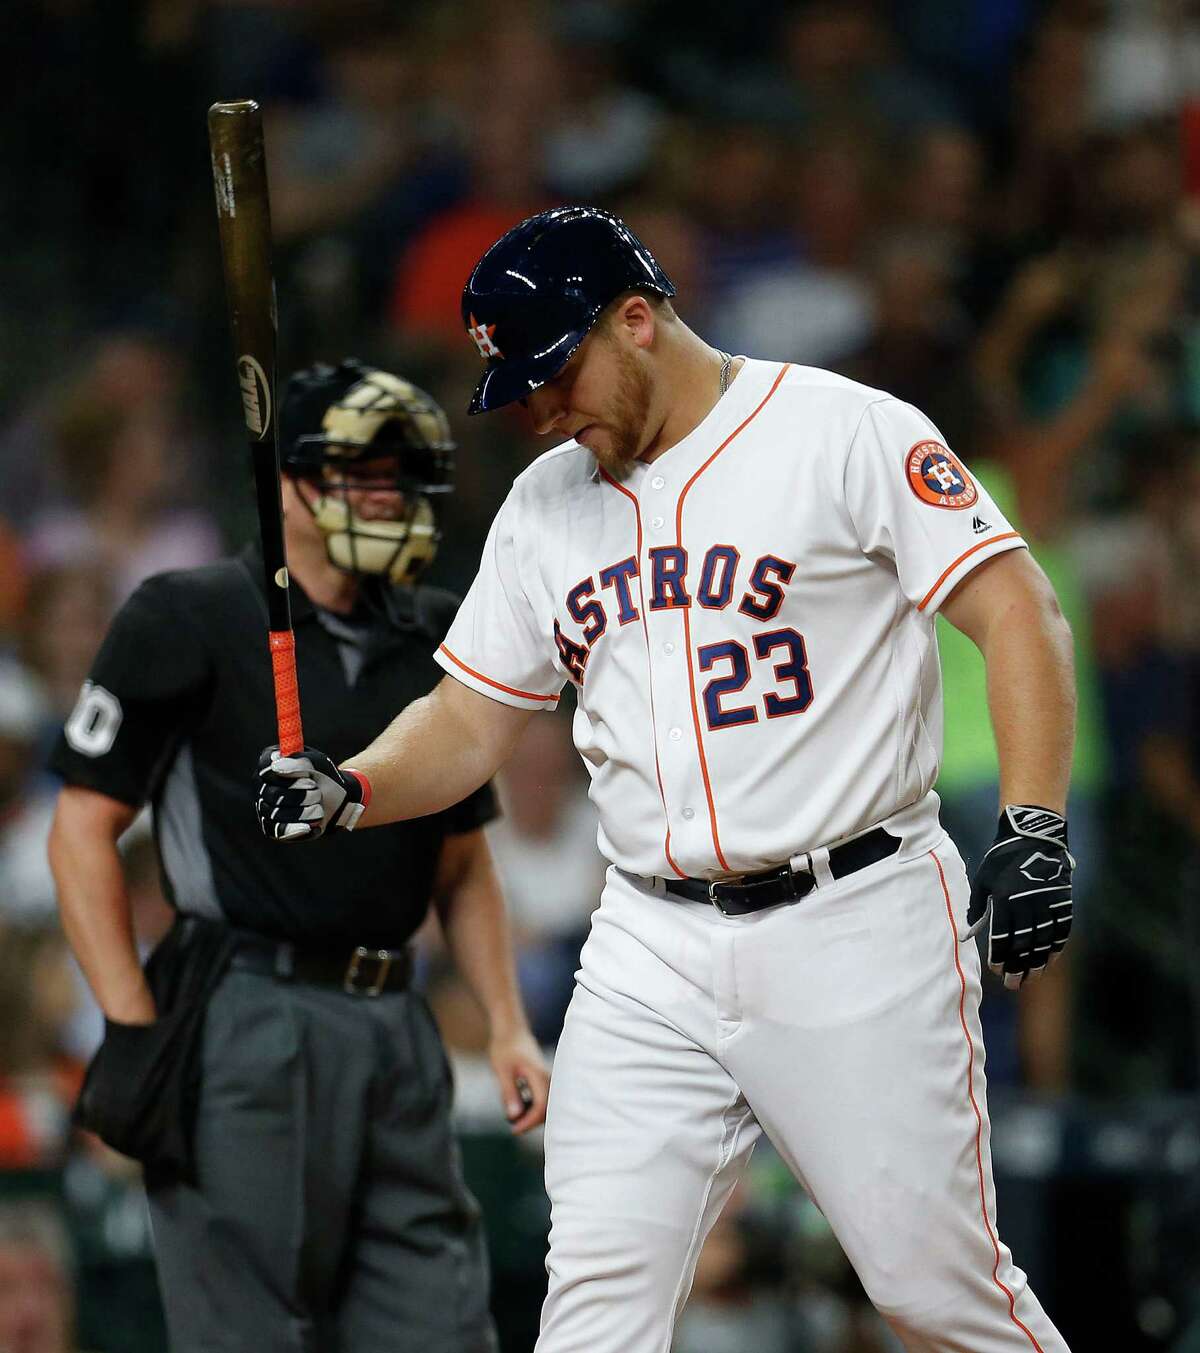 Houston Astros A.J. Reed (23) reacts after striking out during the seventh inning of an MLB baseball game at Minute Maid Park, Thursday, July 7, 2016, in Houston.